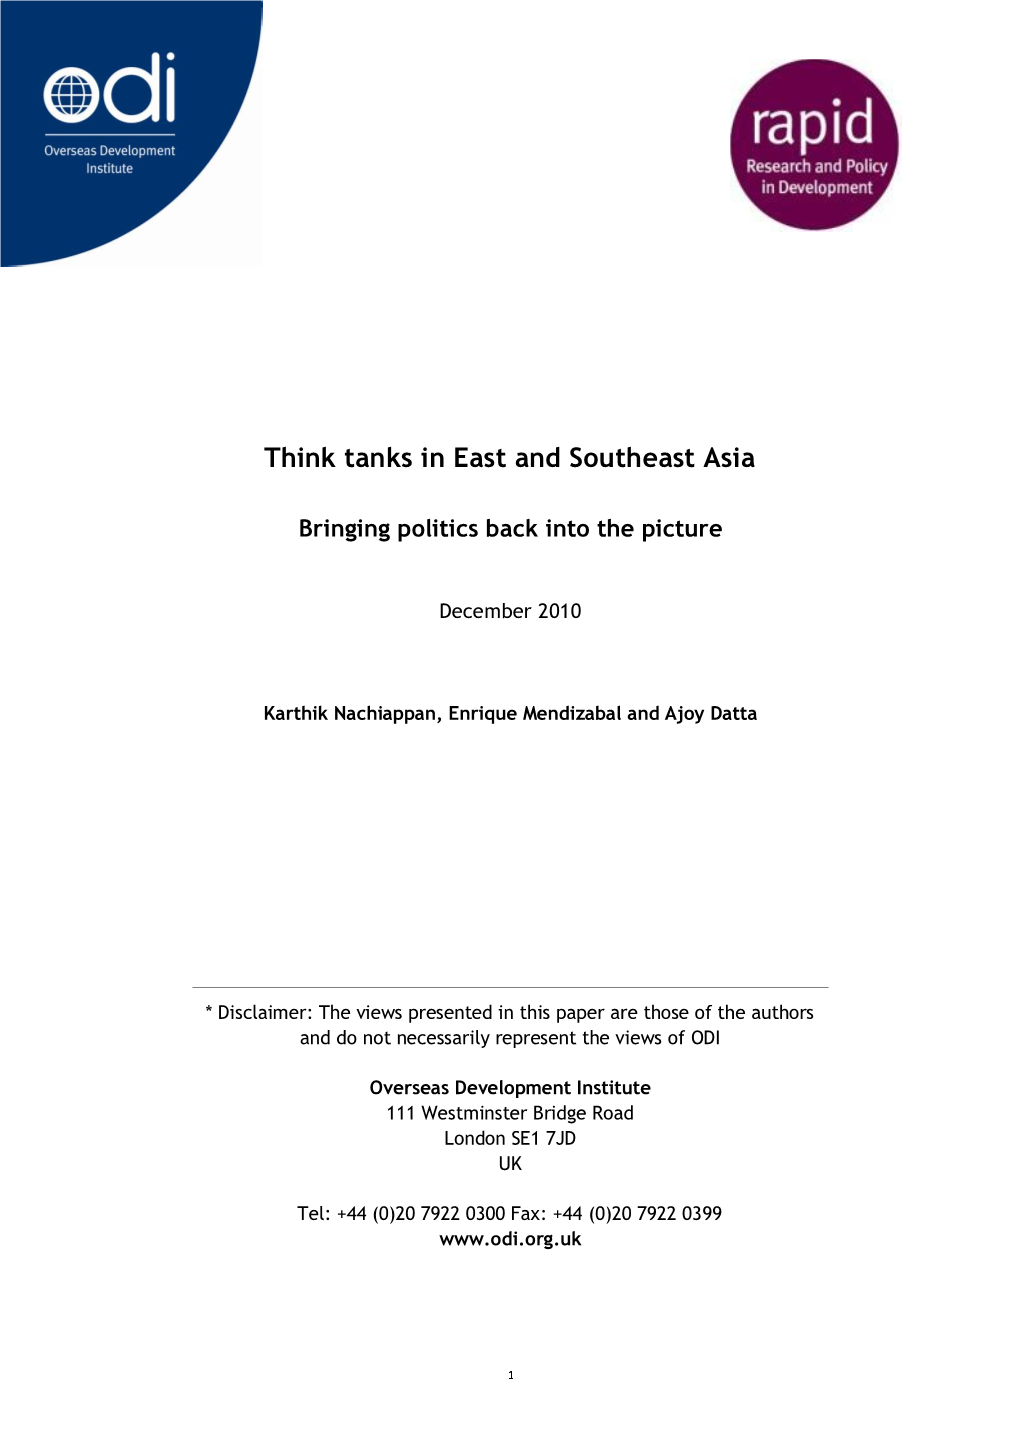 Think Tanks in East and Southeast Asia